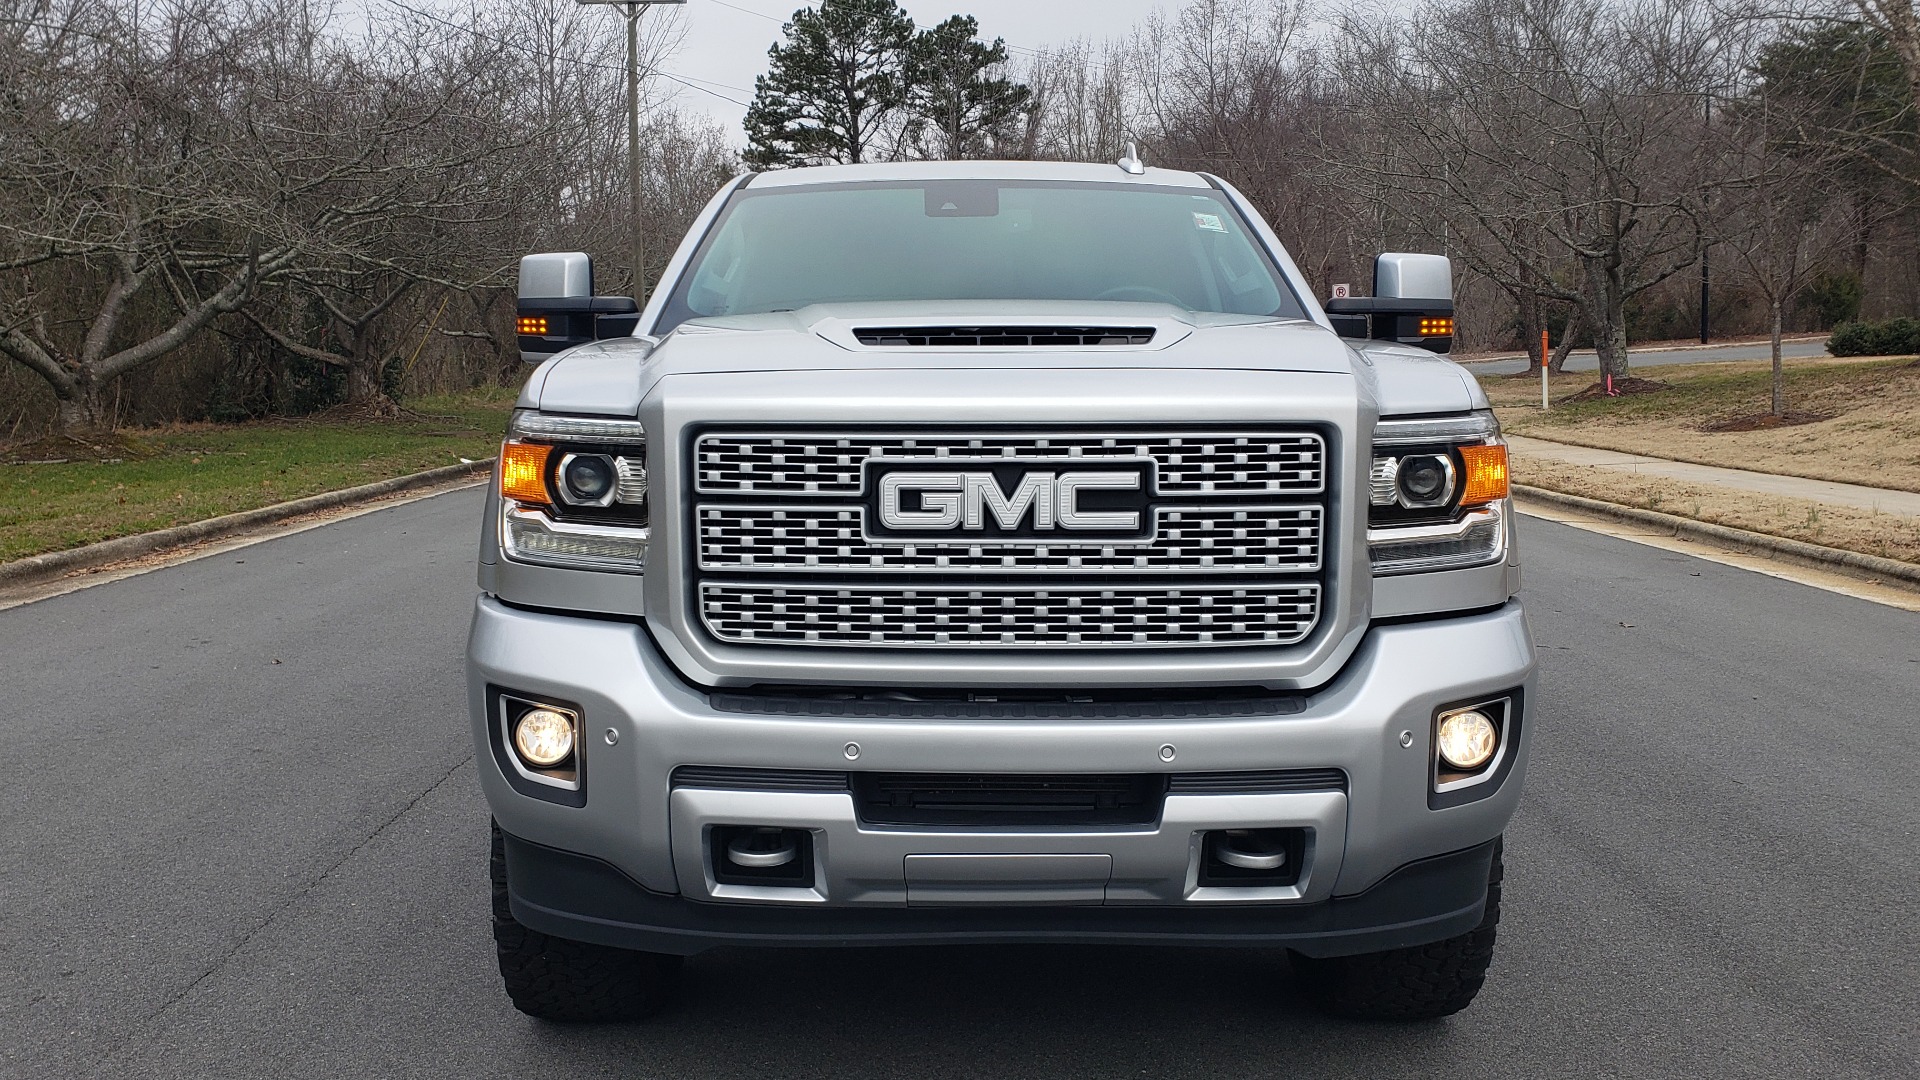 Used 2018 GMC SIERRA 2500HD DENALI 4X4 CREWCAB / 6.6L DURAMAX PLUS / NAV / SUNROOF / REARVIEW for sale Sold at Formula Imports in Charlotte NC 28227 21